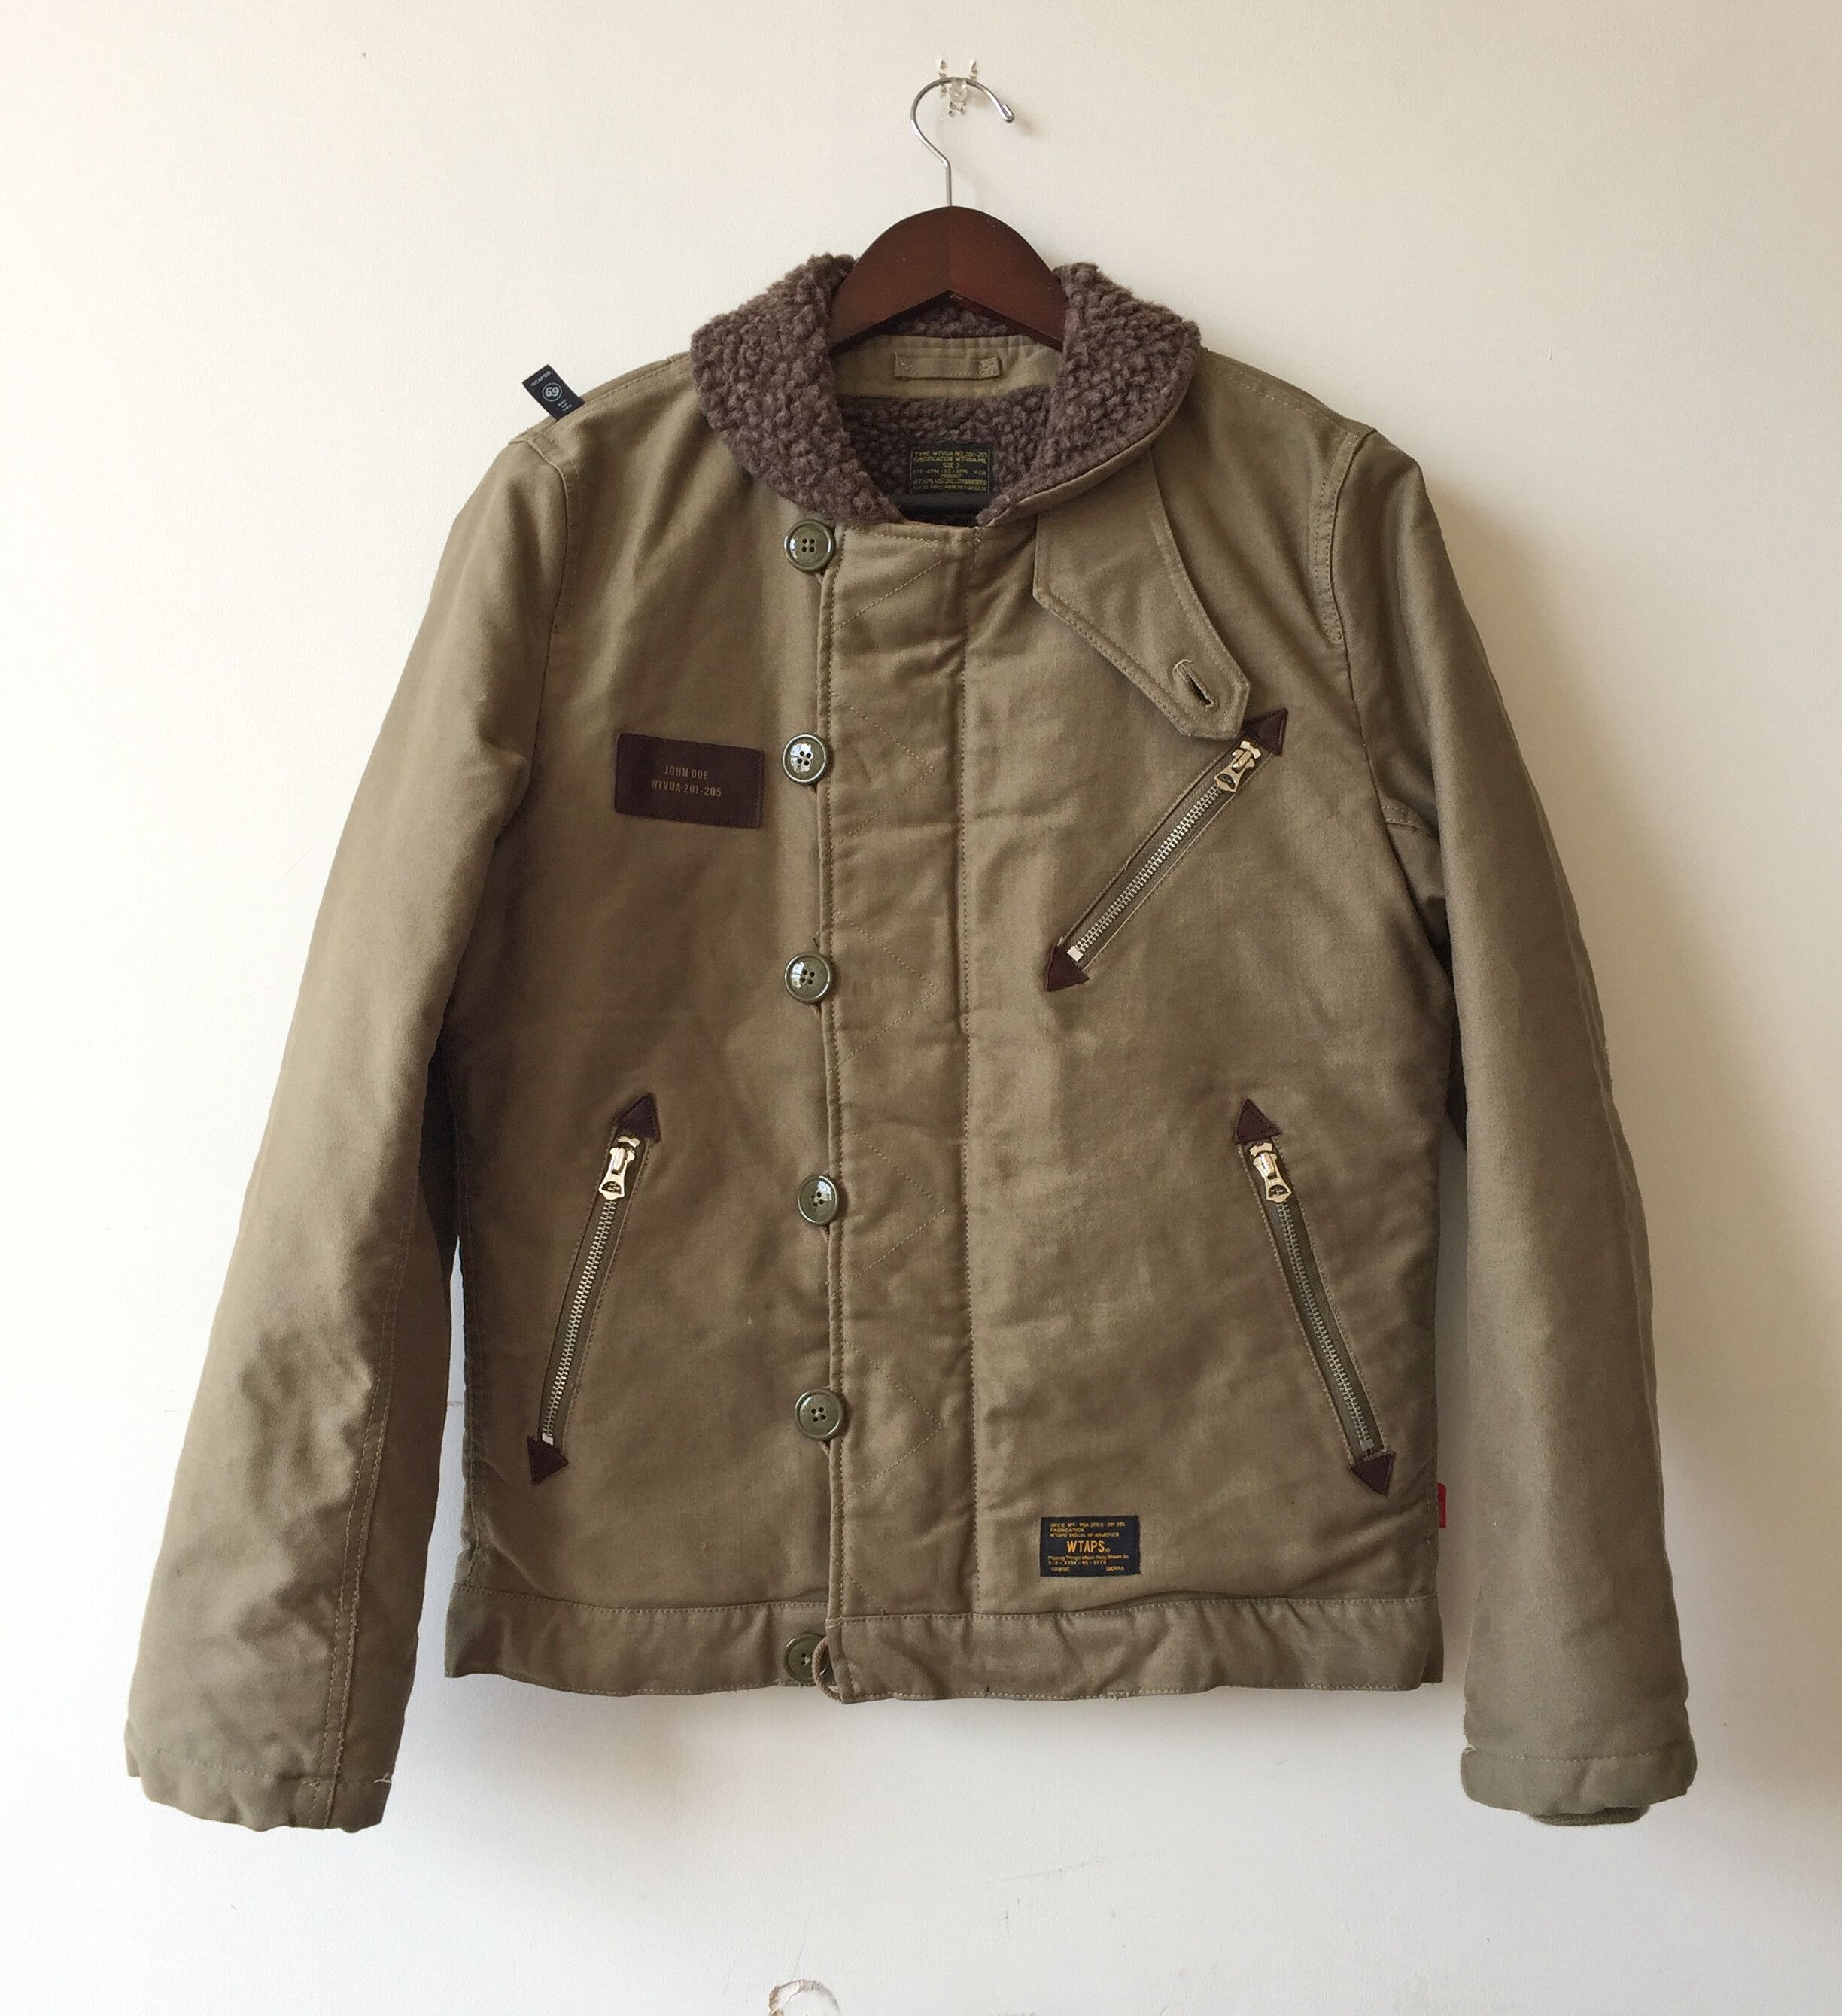 buy retail prices 12AW M-43 Deck Jacket | www.fcbsudan.com